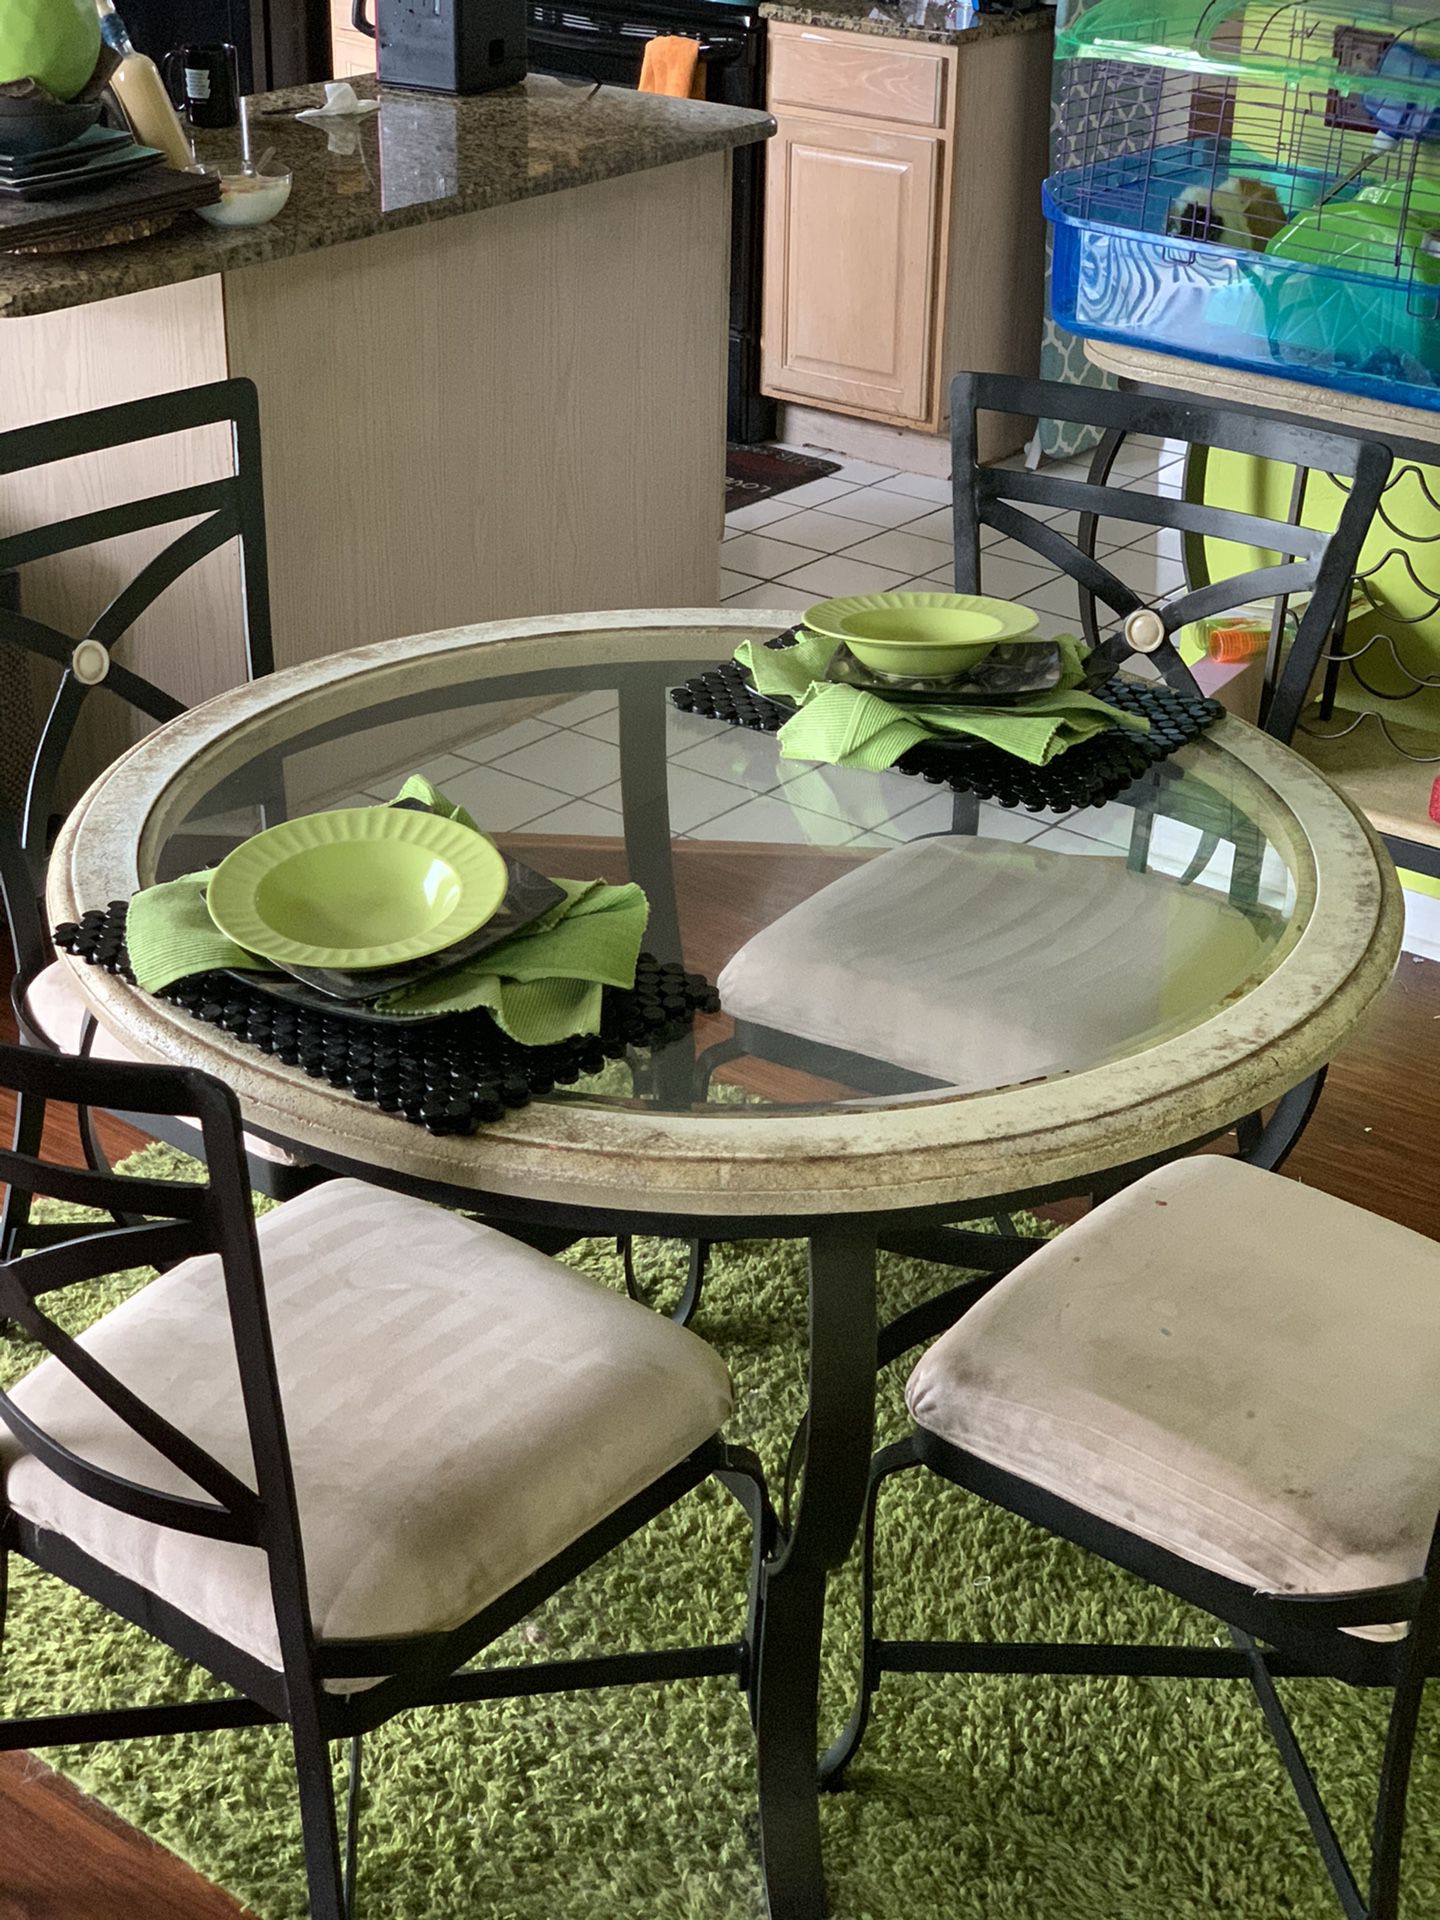 Breakfast Nook Table And Chairs